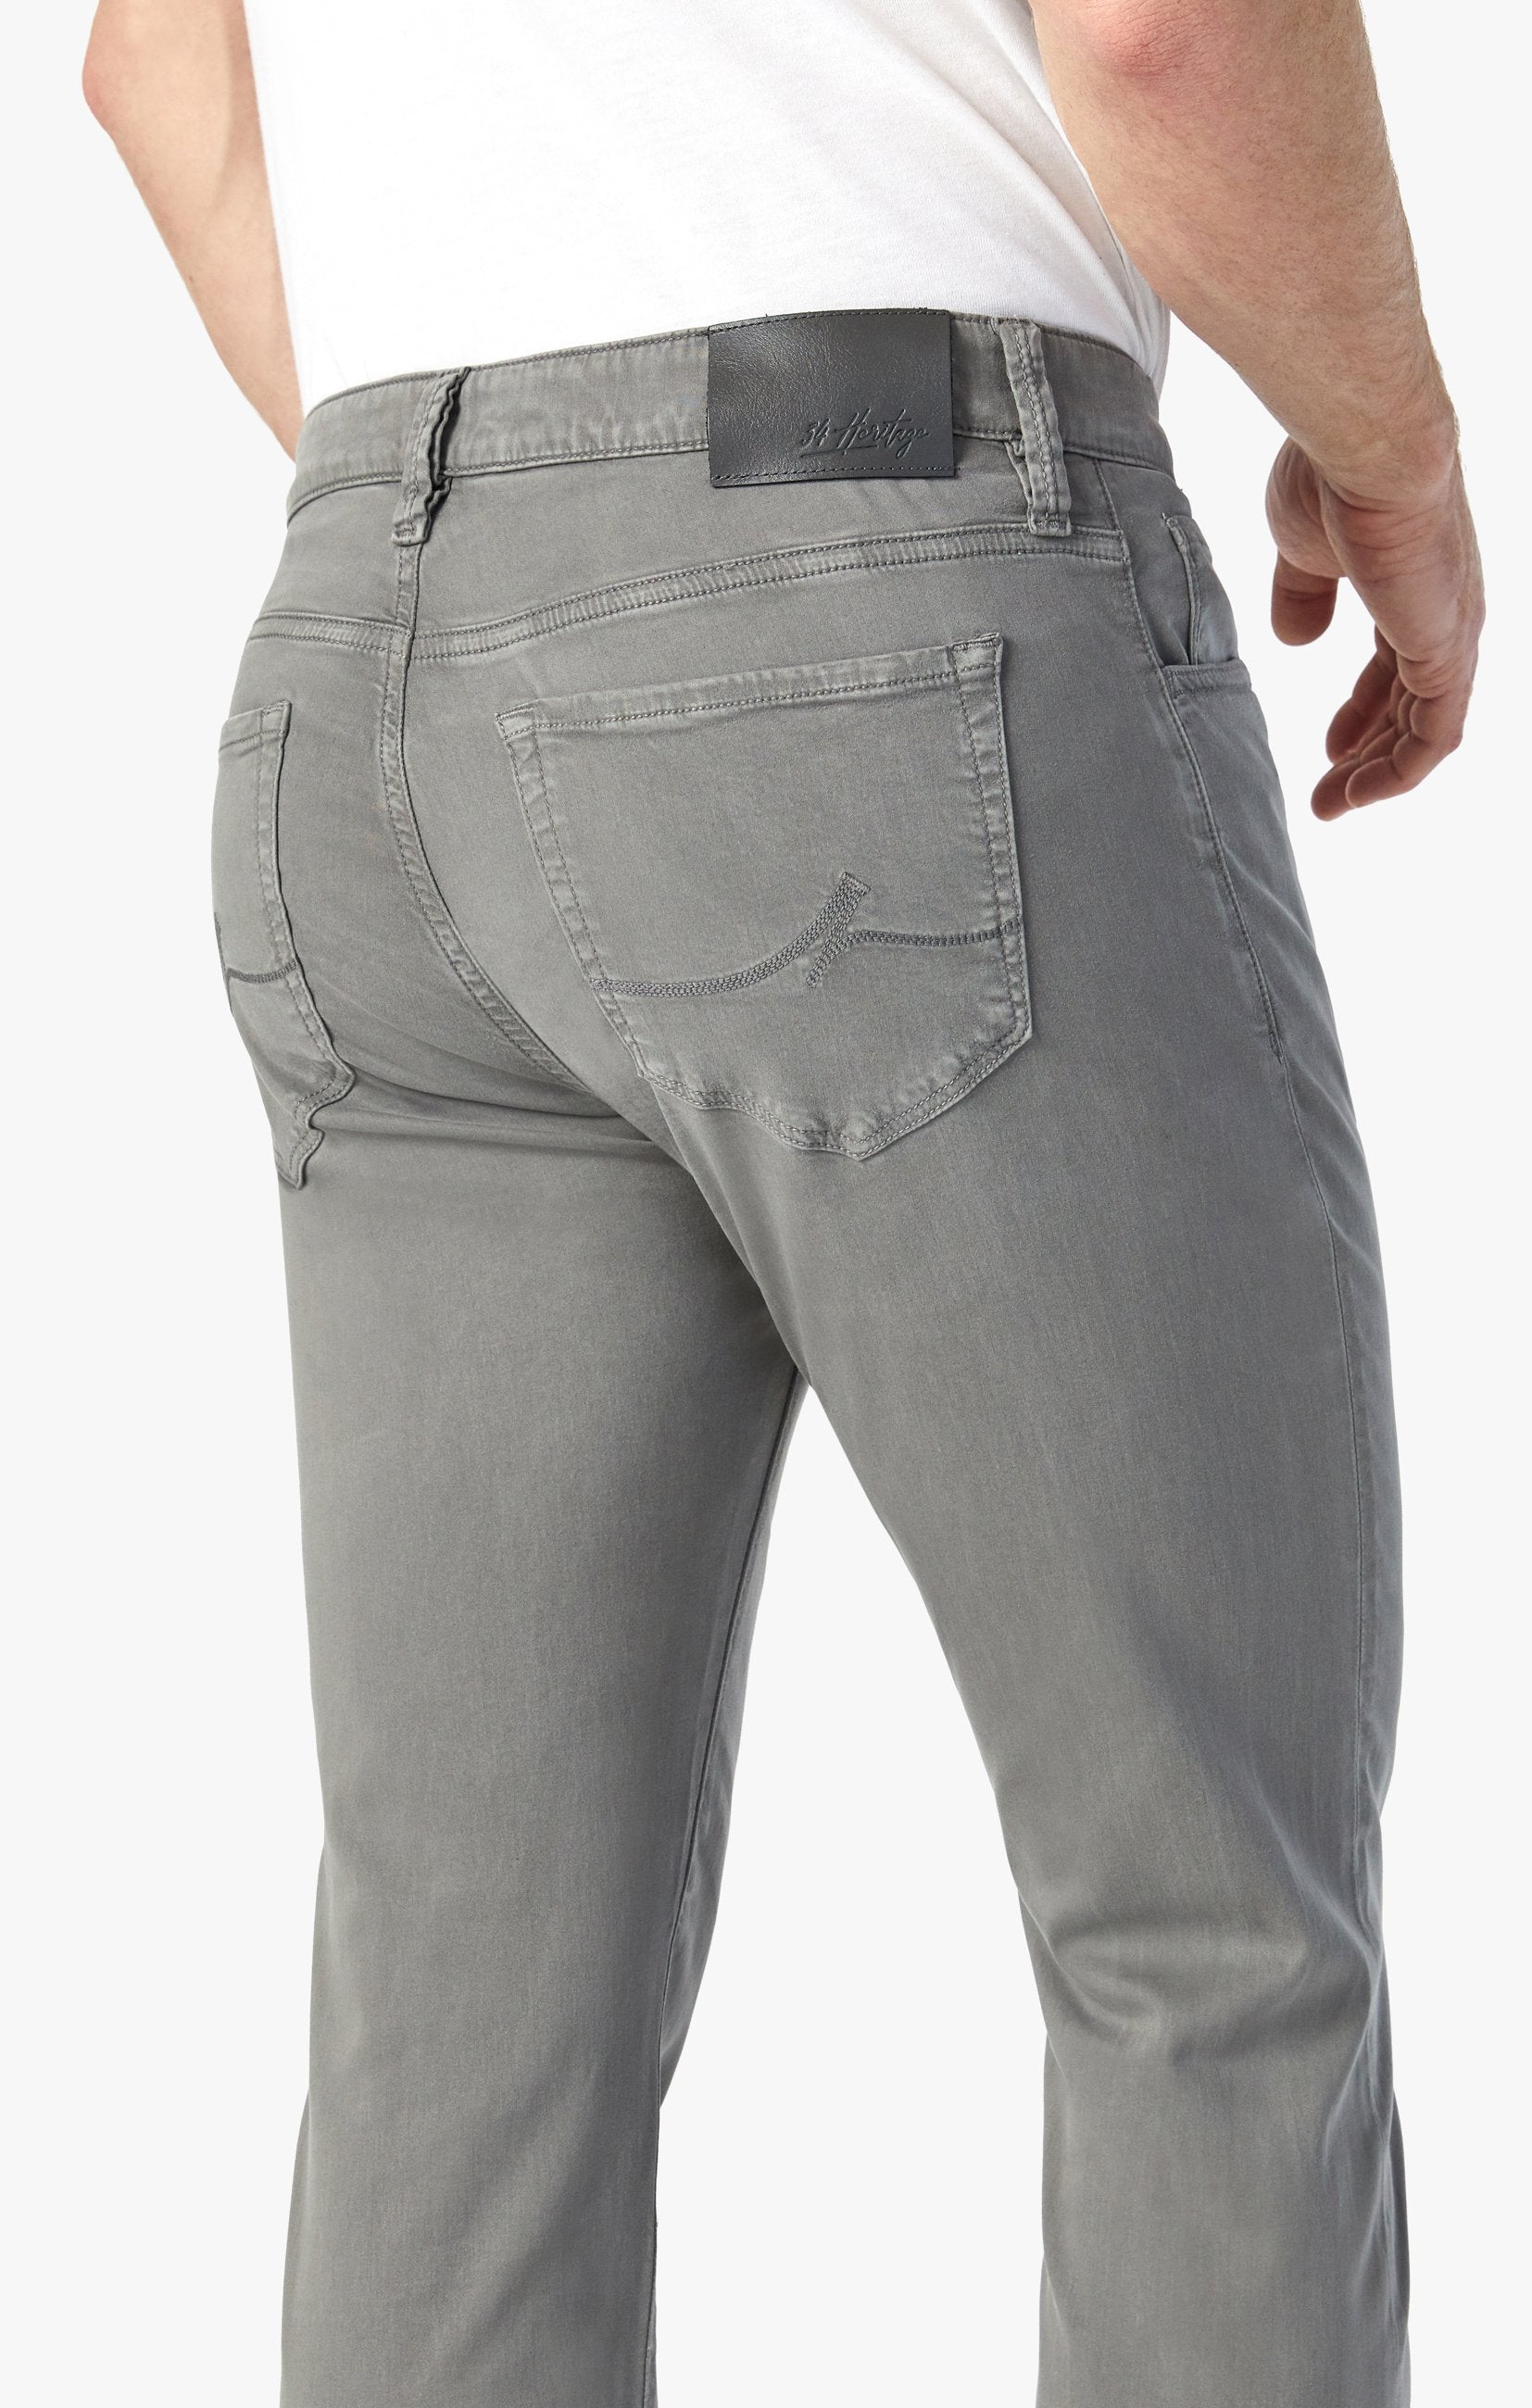 Courage Straight Leg Pants In Pewter Twill Image 4